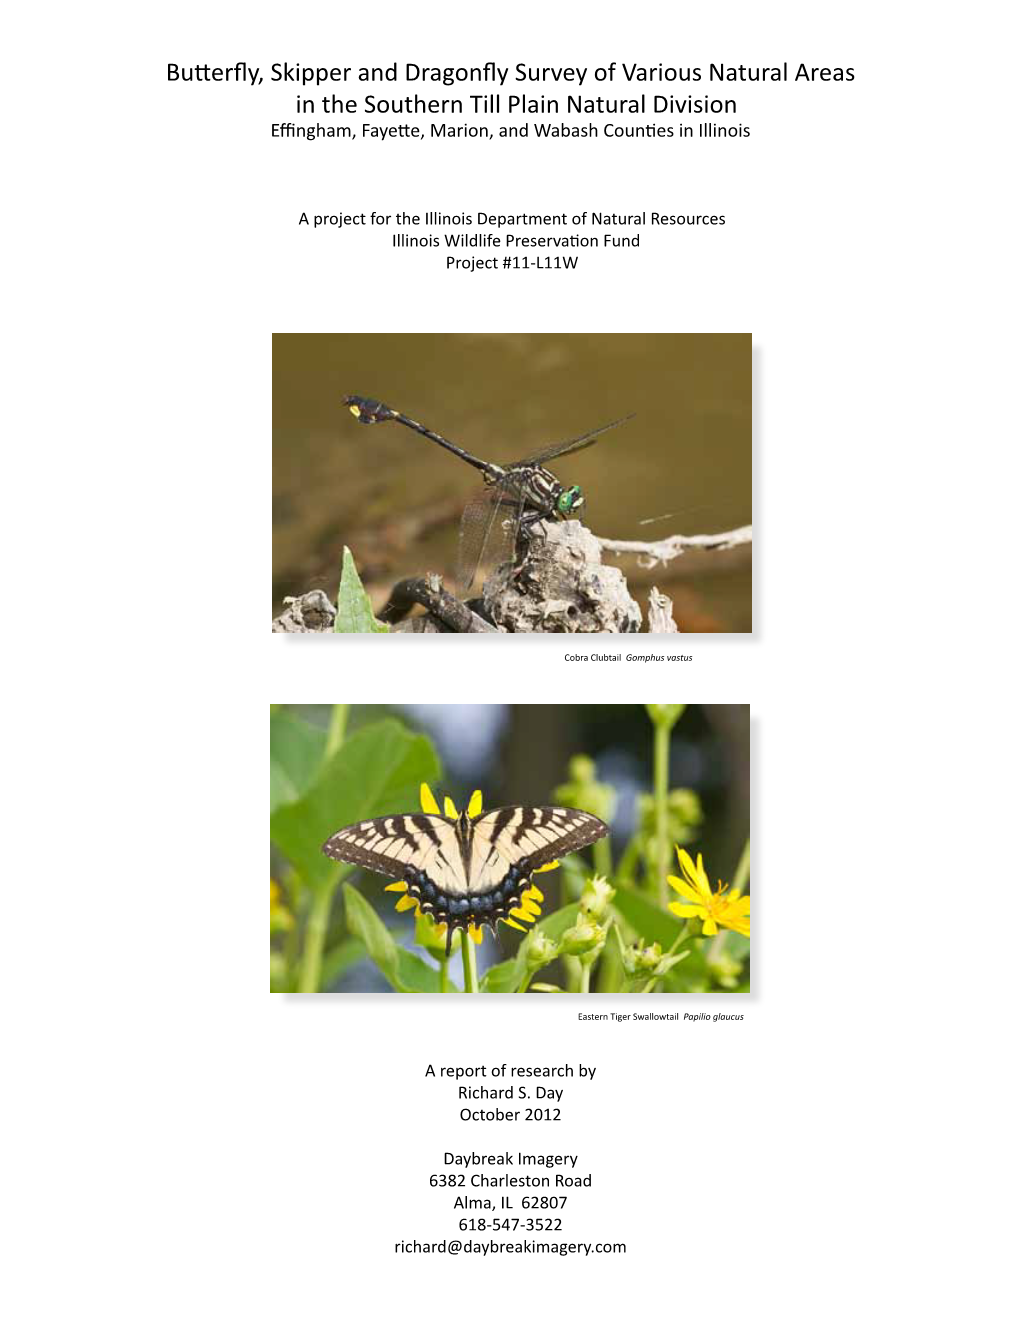 Butterfly, Skipper and Dragonfly Survey of Various Natural Areas In